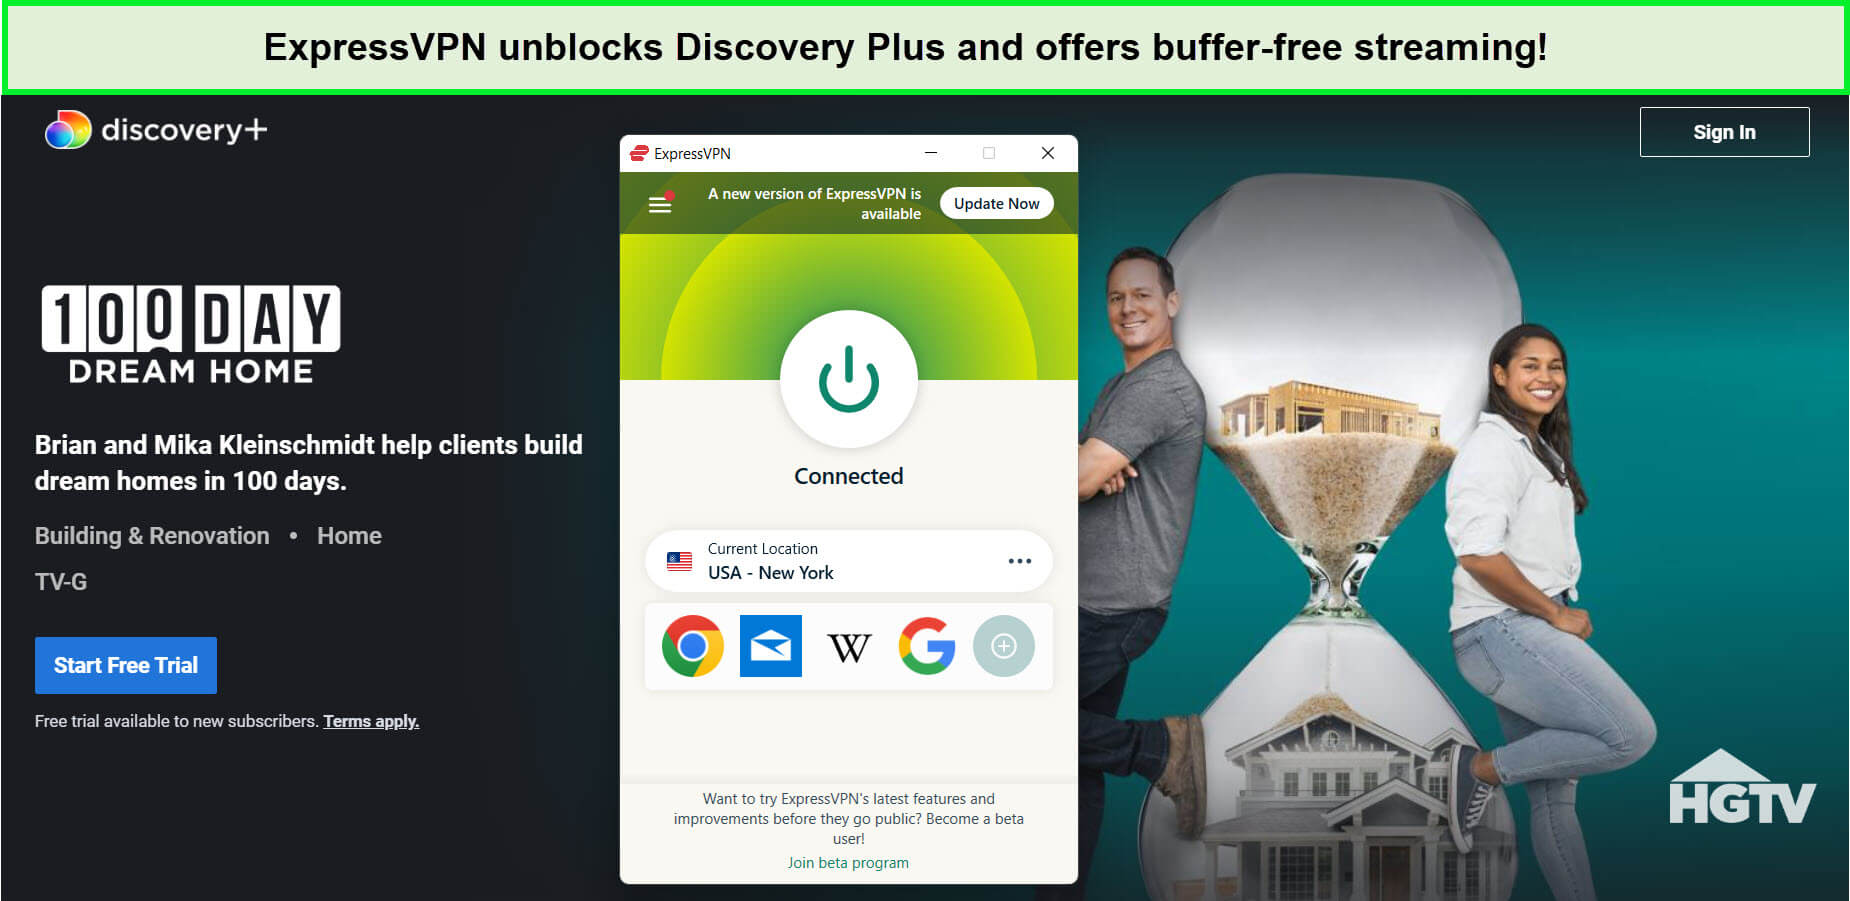 expressvpn-unblocks-hundred-day-dream-home-on-discovery-plus-outside-USA